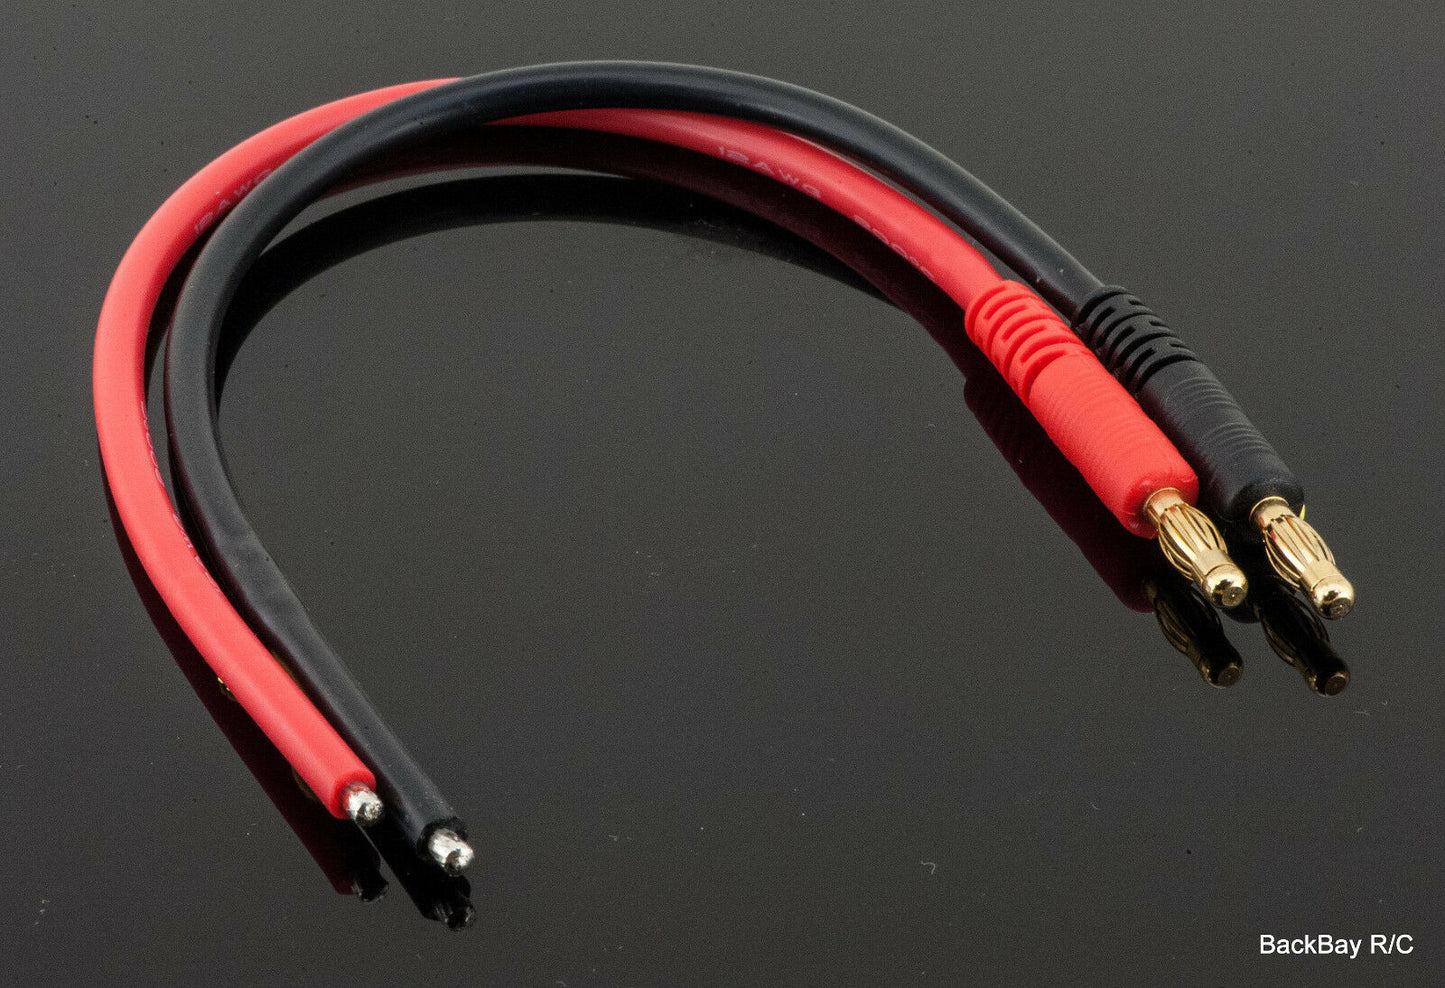 12awg Wire To 4mm Bullet - Build Your Own Charger Adapter - 45CM / 60CM